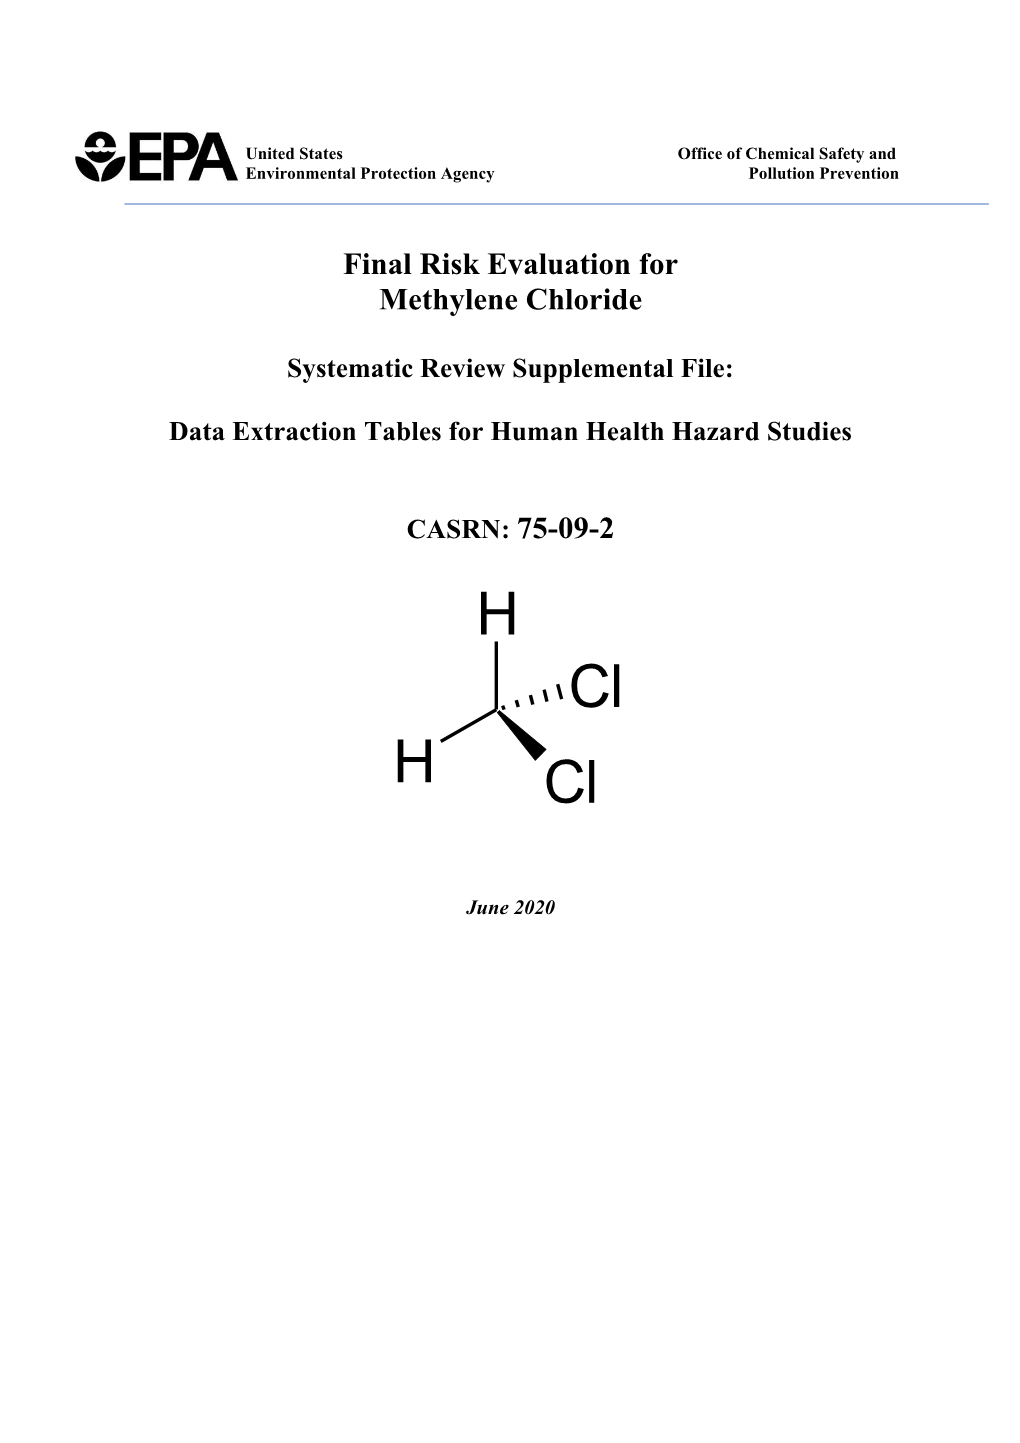 Final Risk Evaluation for Methylene Chloride Systematic Review